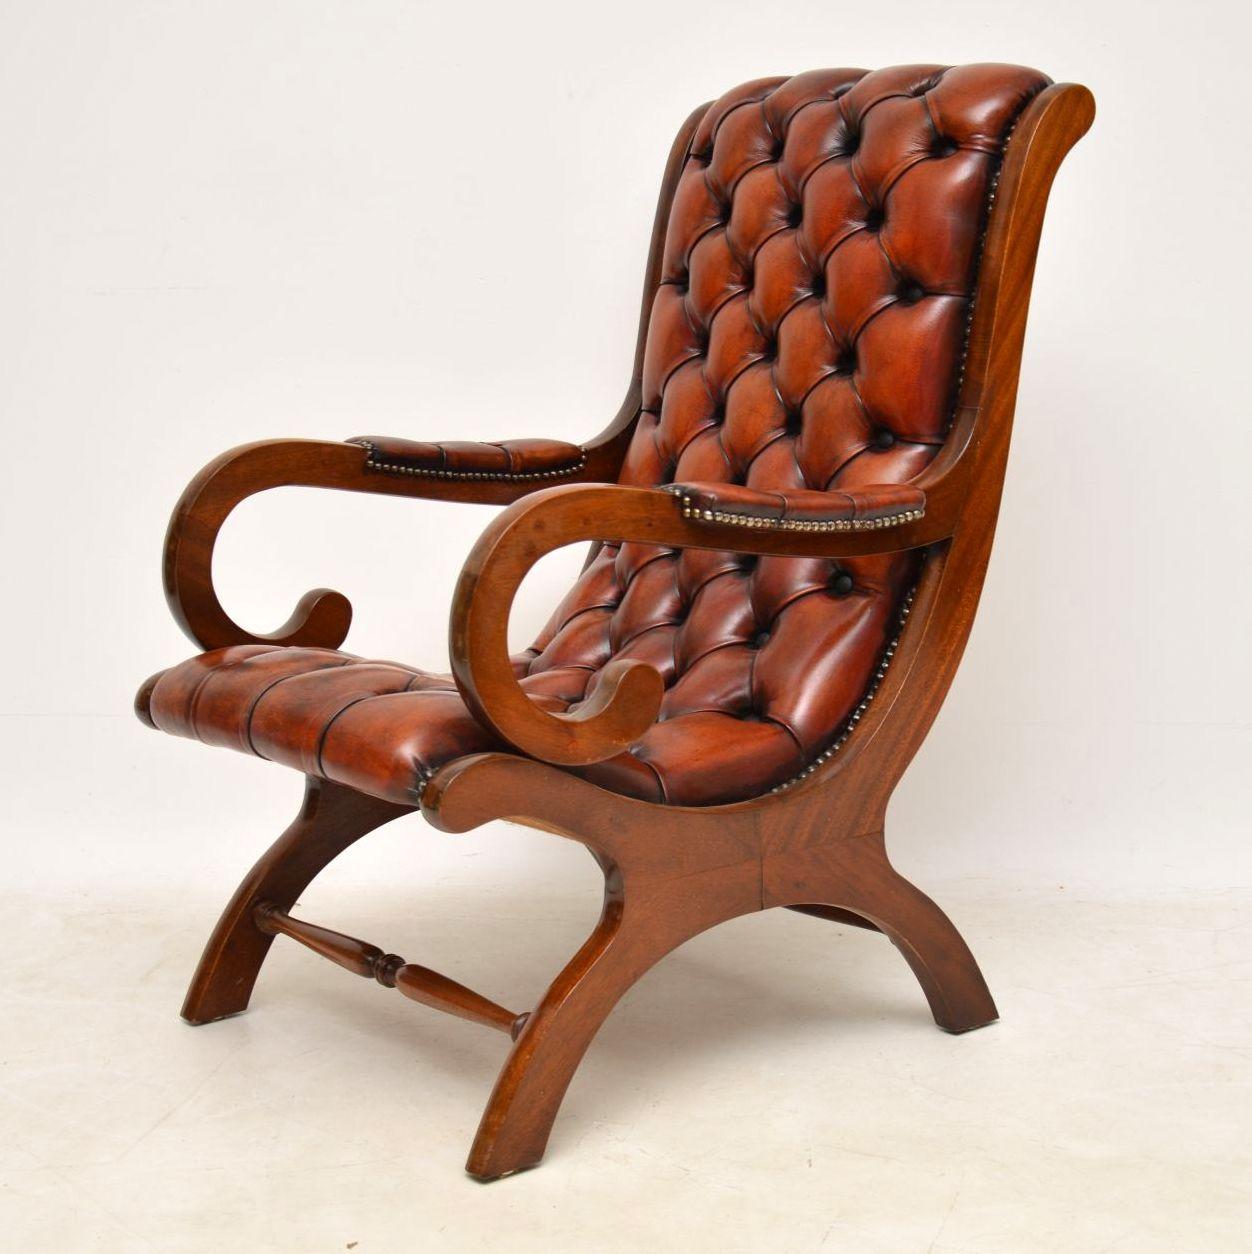 Antique Regency Style Leather and Mahogany Armchair (Englisch)